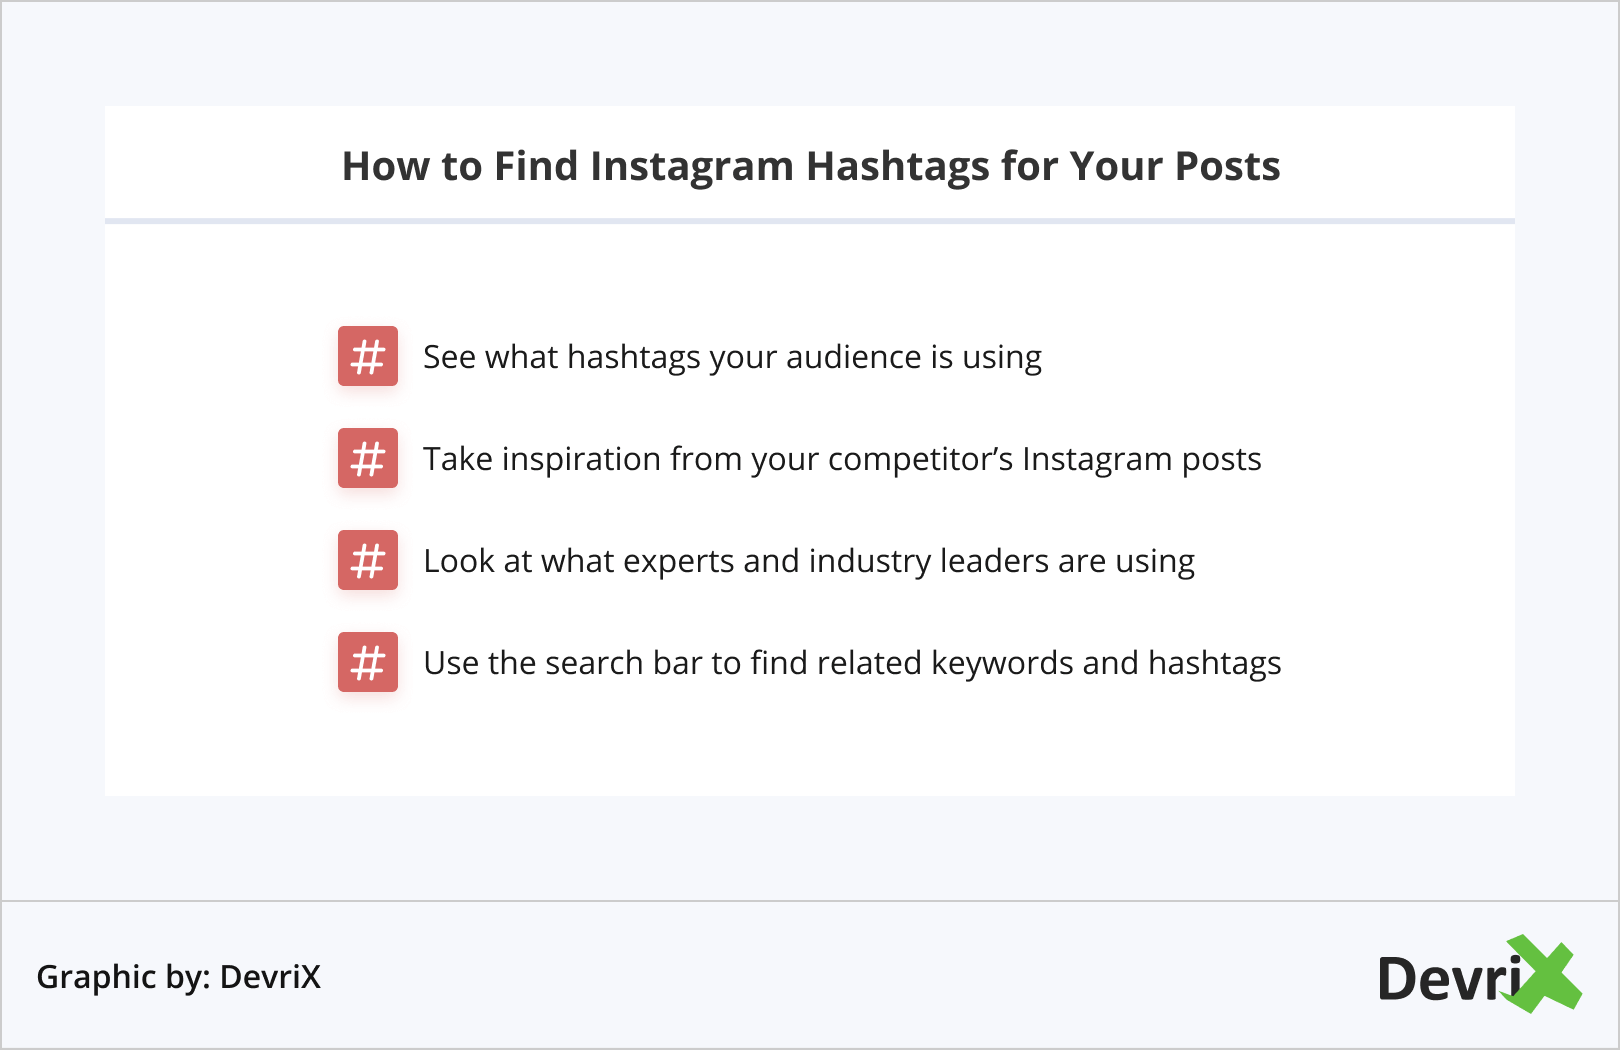 How to Find Instagram Hashtags for Your Posts